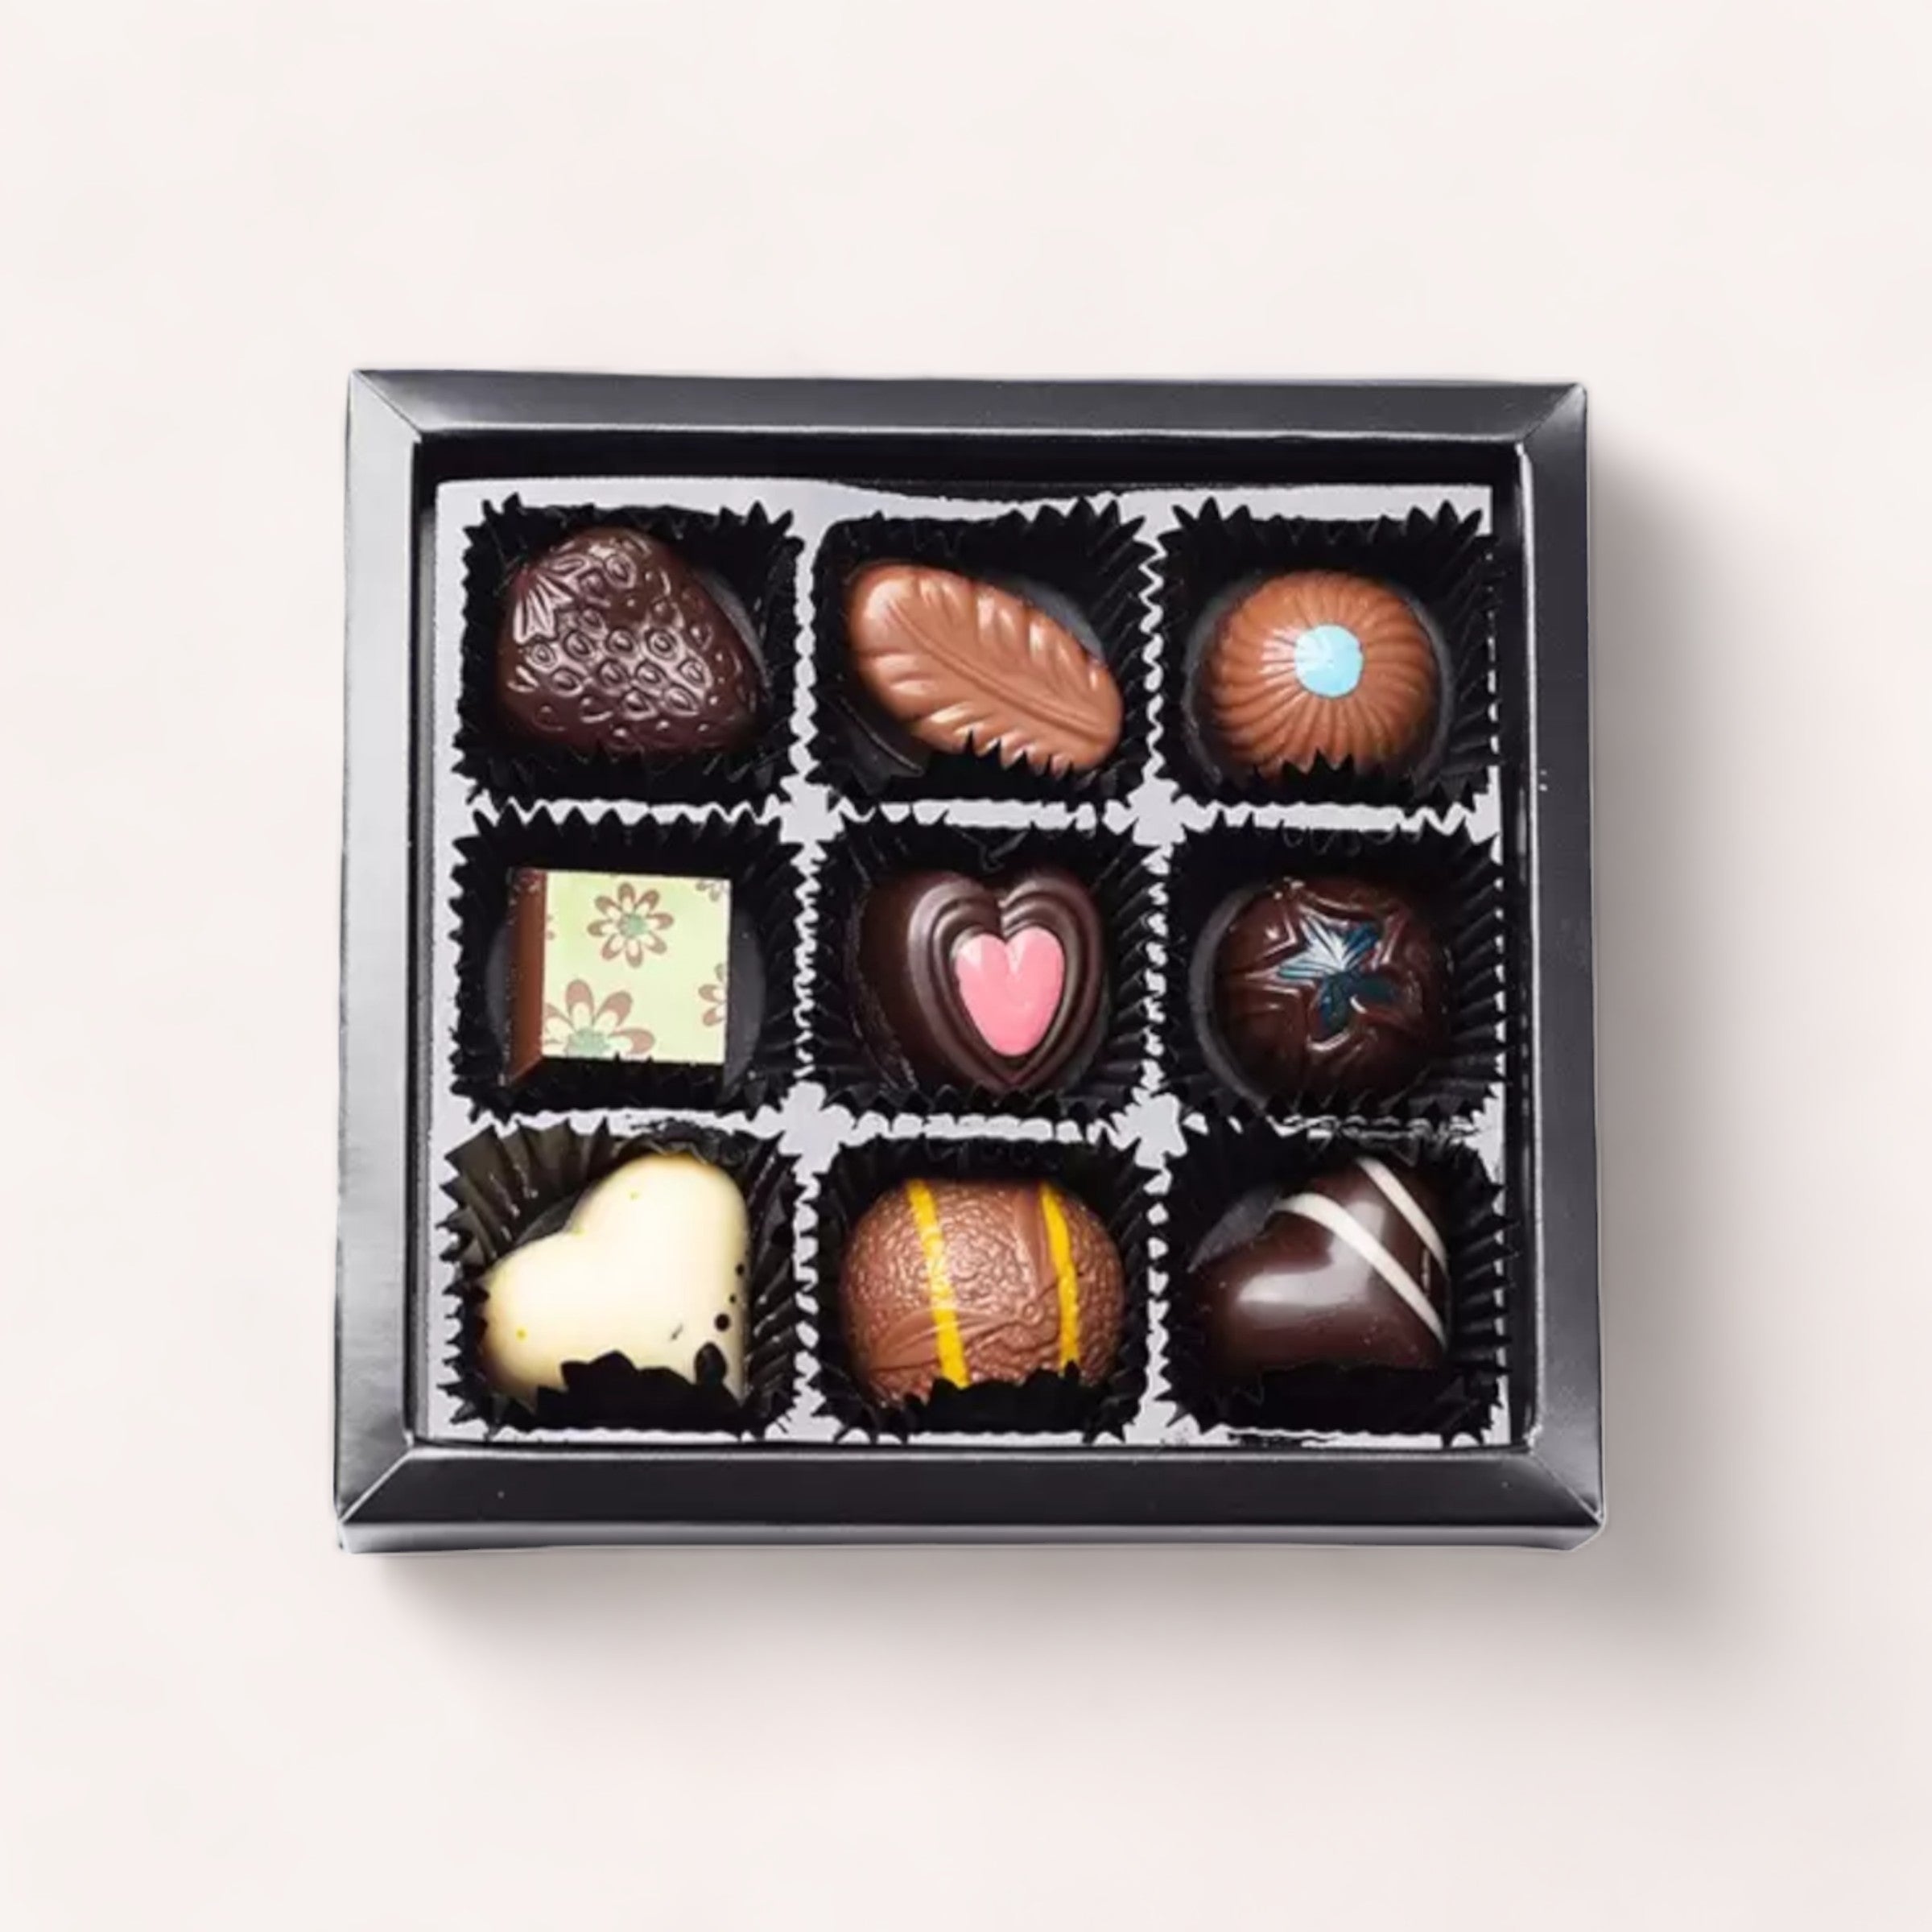 A 9 Piece Chocolate Gift Box by Chocolate Traders with various shapes and designs including hearts and flowers, displayed against a light grey background.